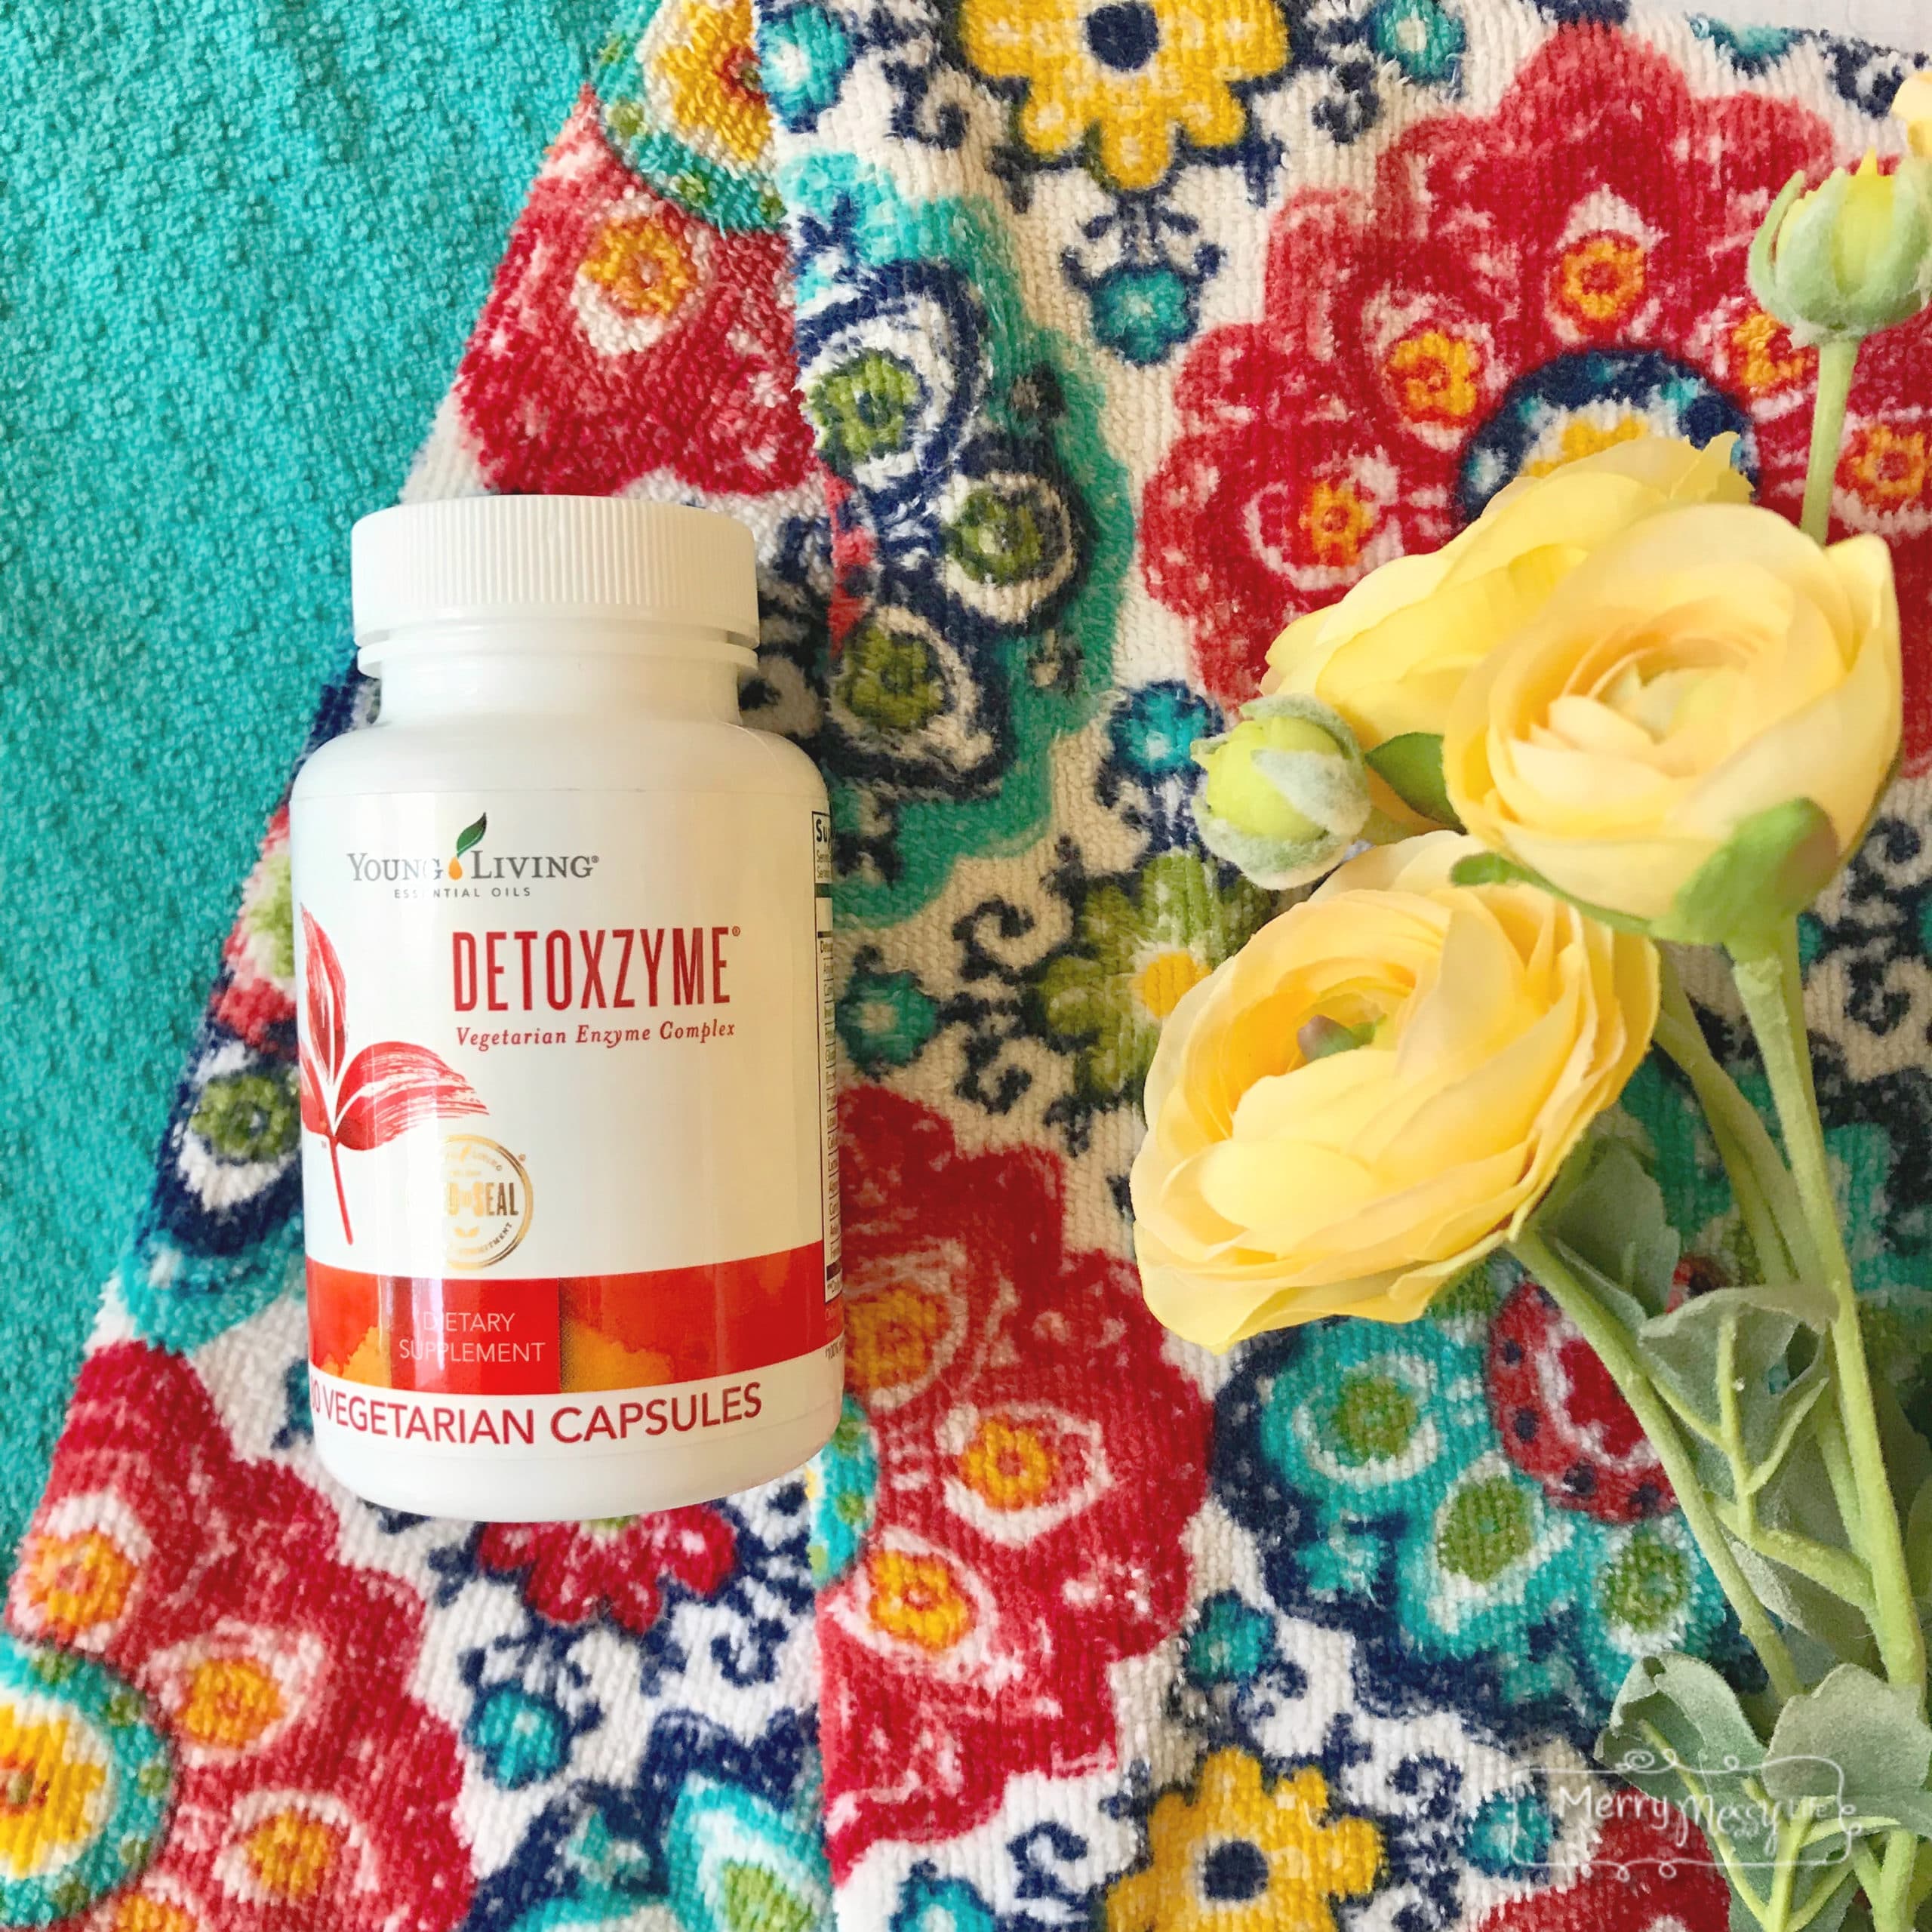 Detoxzyme - one of my favorite hair, nail and skin supplements. A digestive enzyme that supports my entire digestive system.